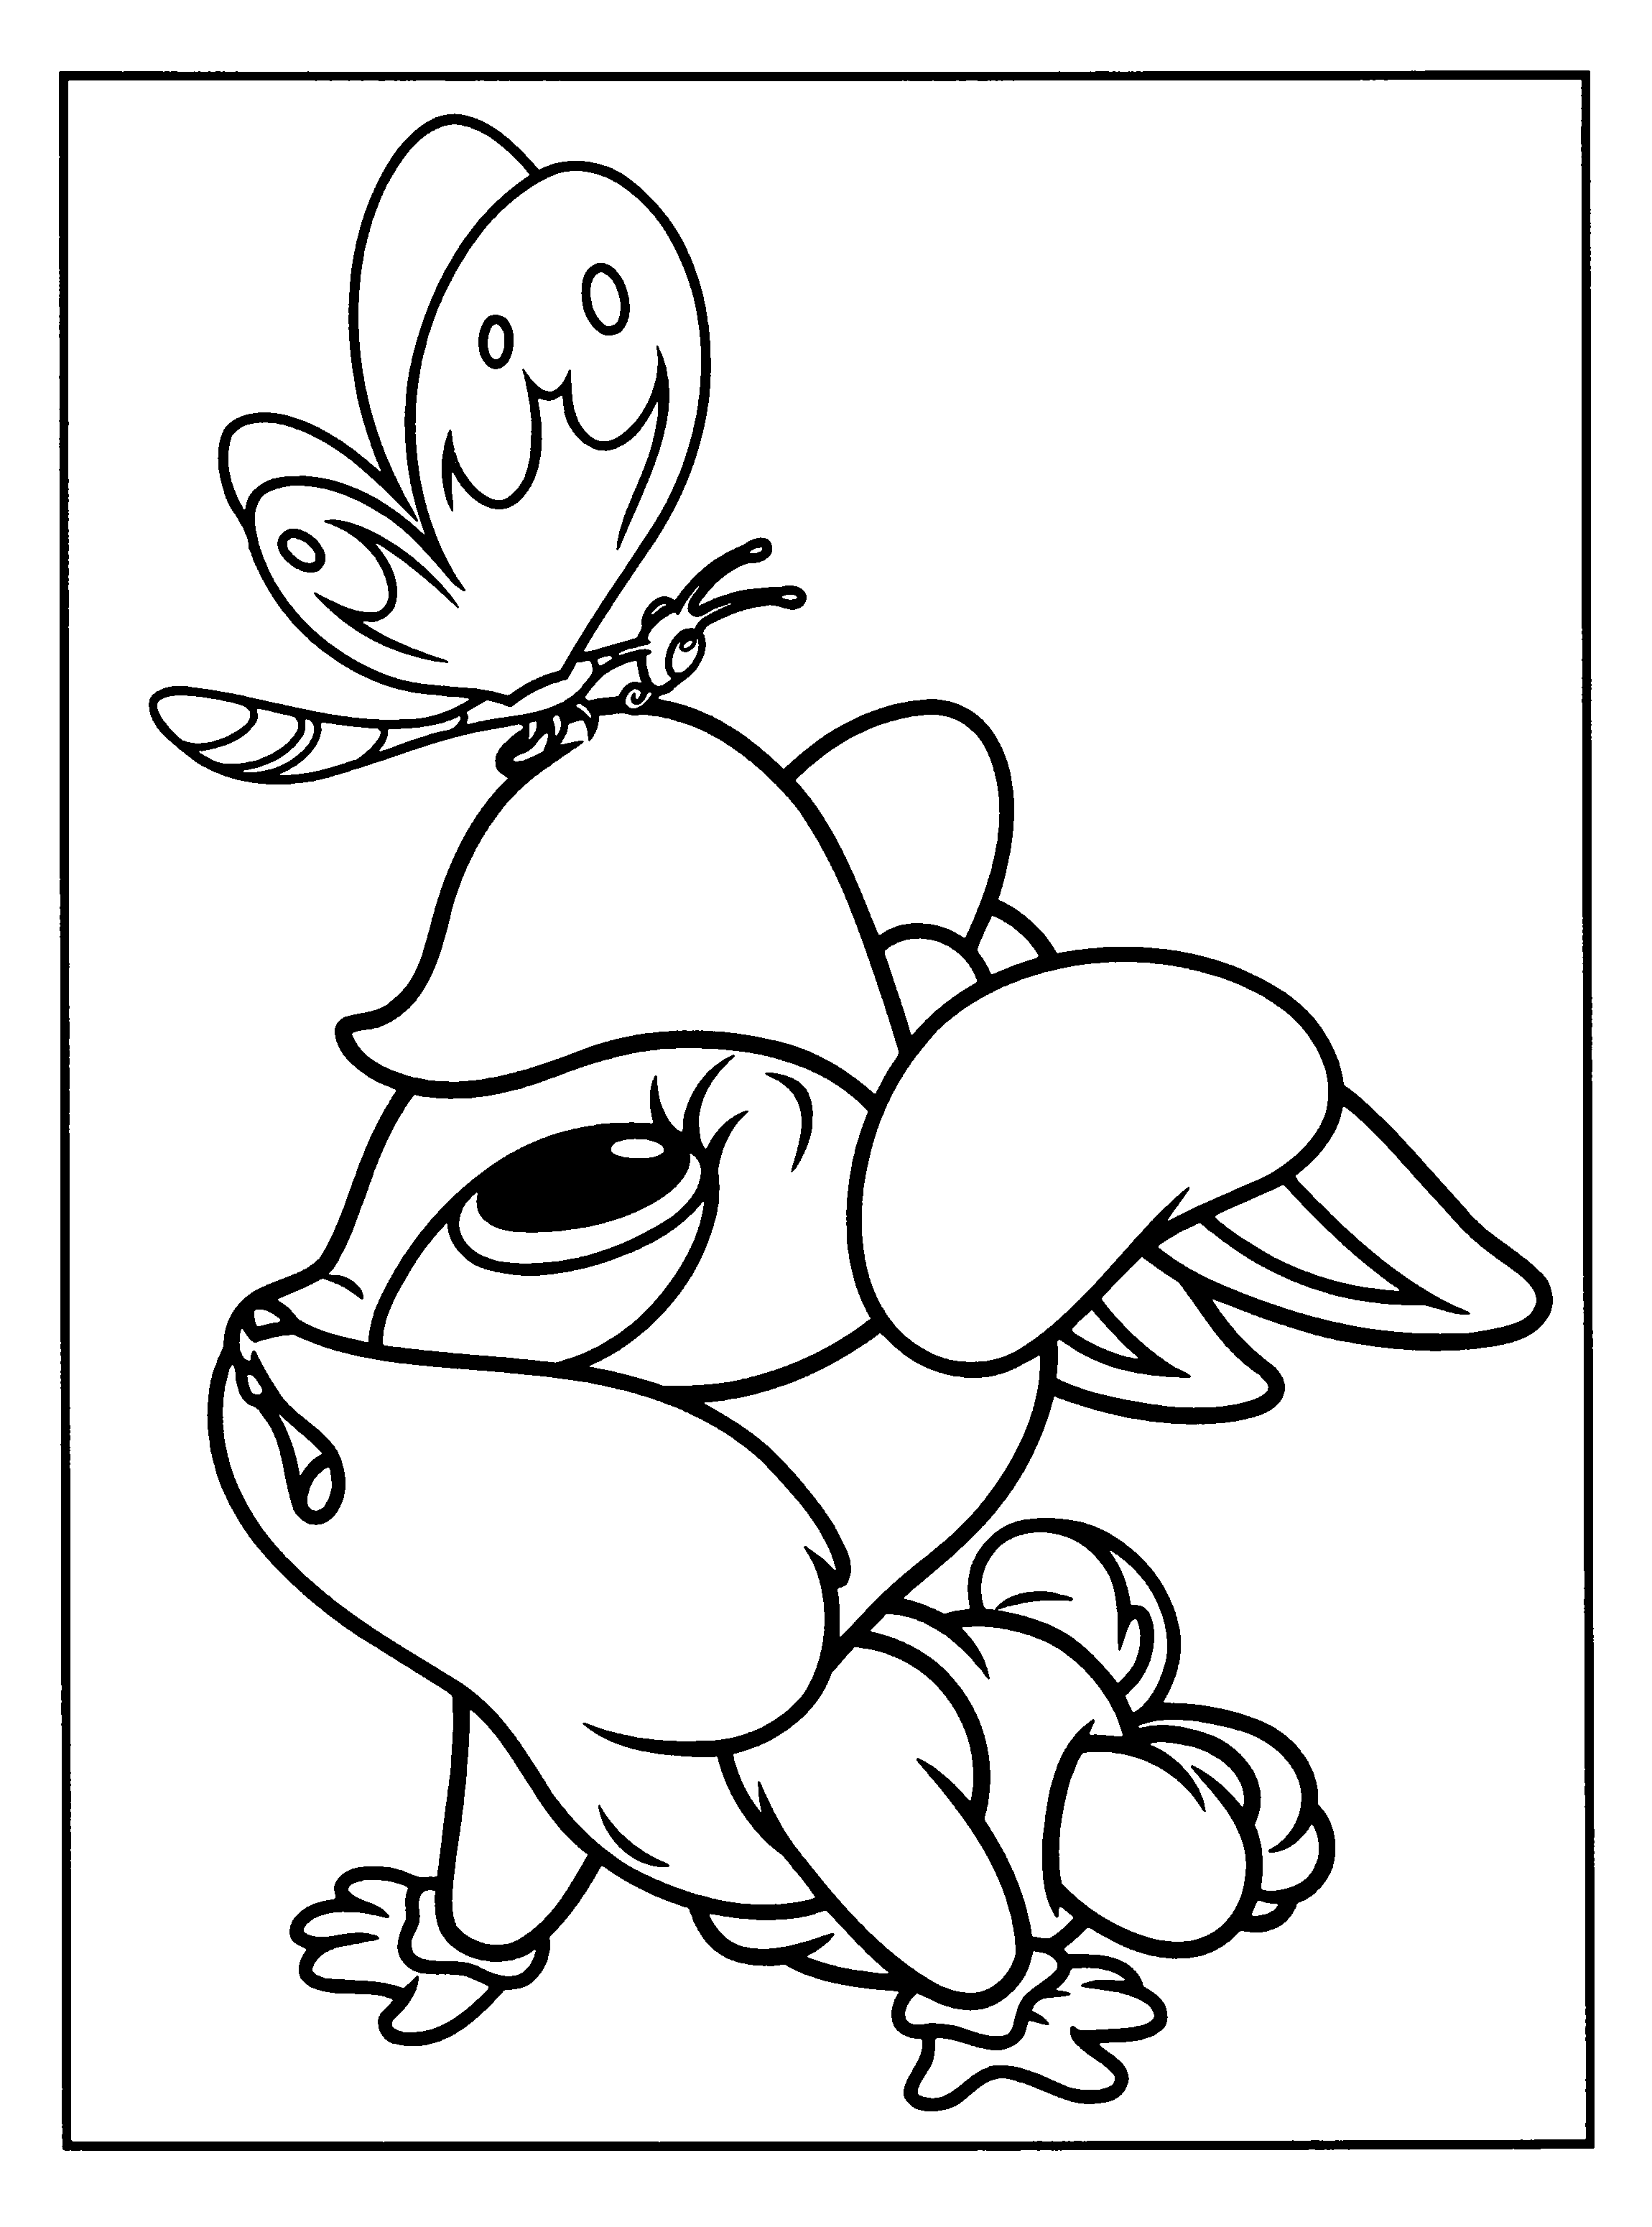 Baby Lola Bunny Coloring Pages - Coloring Home